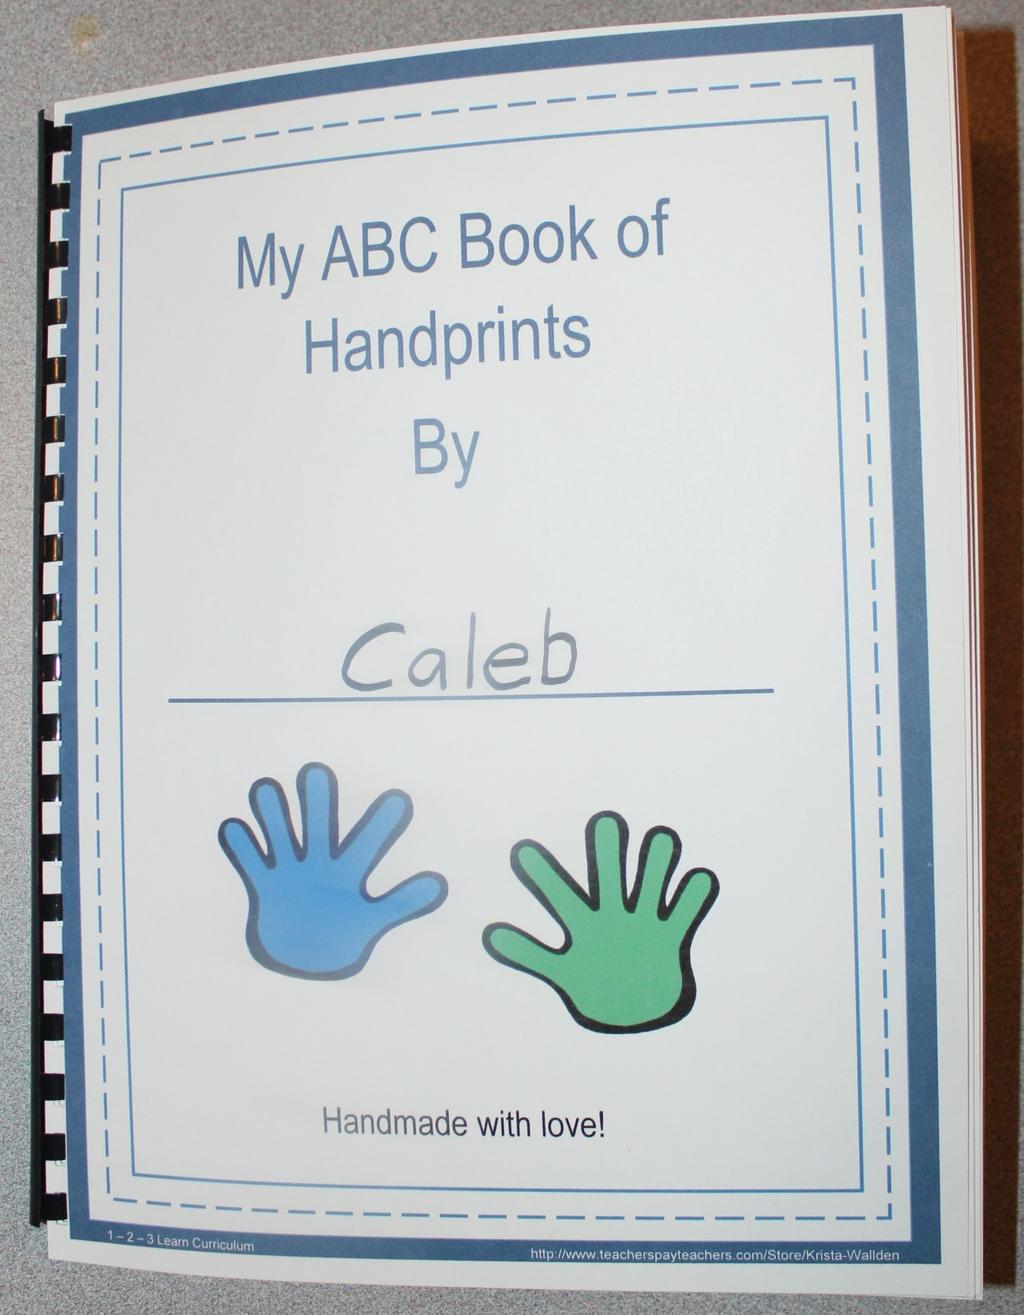 My ABC Book of Handprints Using the following template and pictures, you will be able to make an ABC book of handprints. The pictures show some handprints using wiggly eyes.